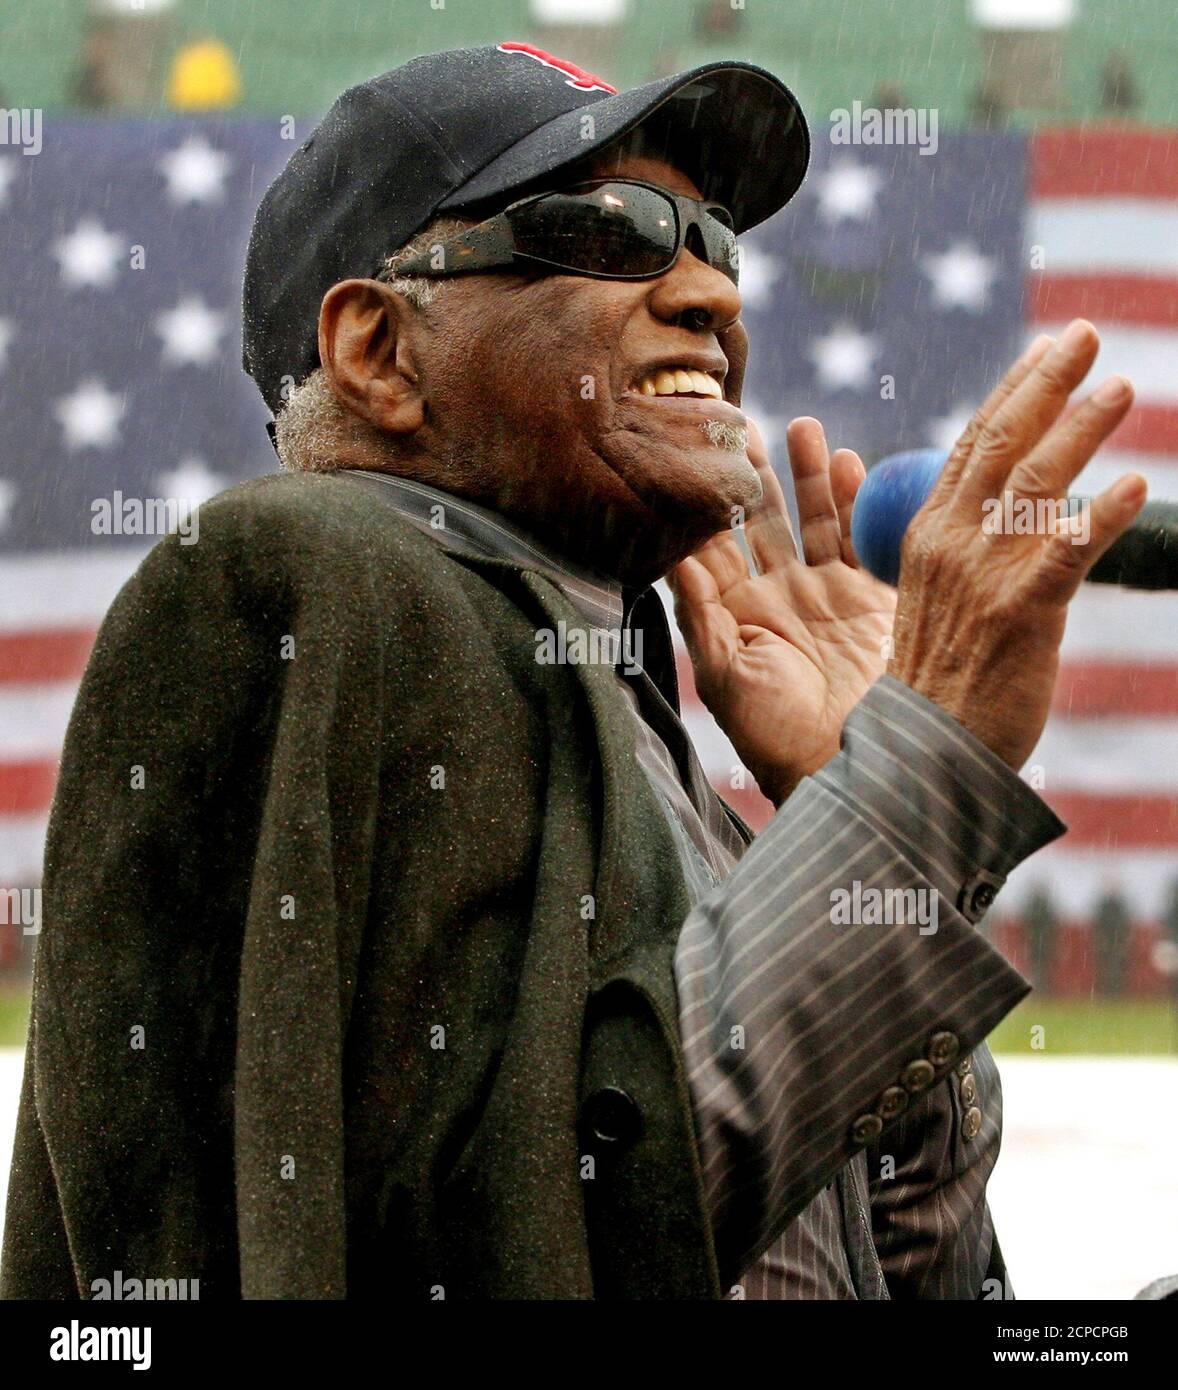 Entertainer Ray Charles sings 'America the Beautiful' in the pouring rain as a giant United States flag covers Fenway Park's renowned 'Green Monster' left field wall during Opening Day ceremonies April 11, 2003 in Boston. The game between the Boston Red Sox and the Baltimore Orioles was called off and delayed until another day due to the heavy rain. REUTERS/Jim Bourg  JRB Stock Photo